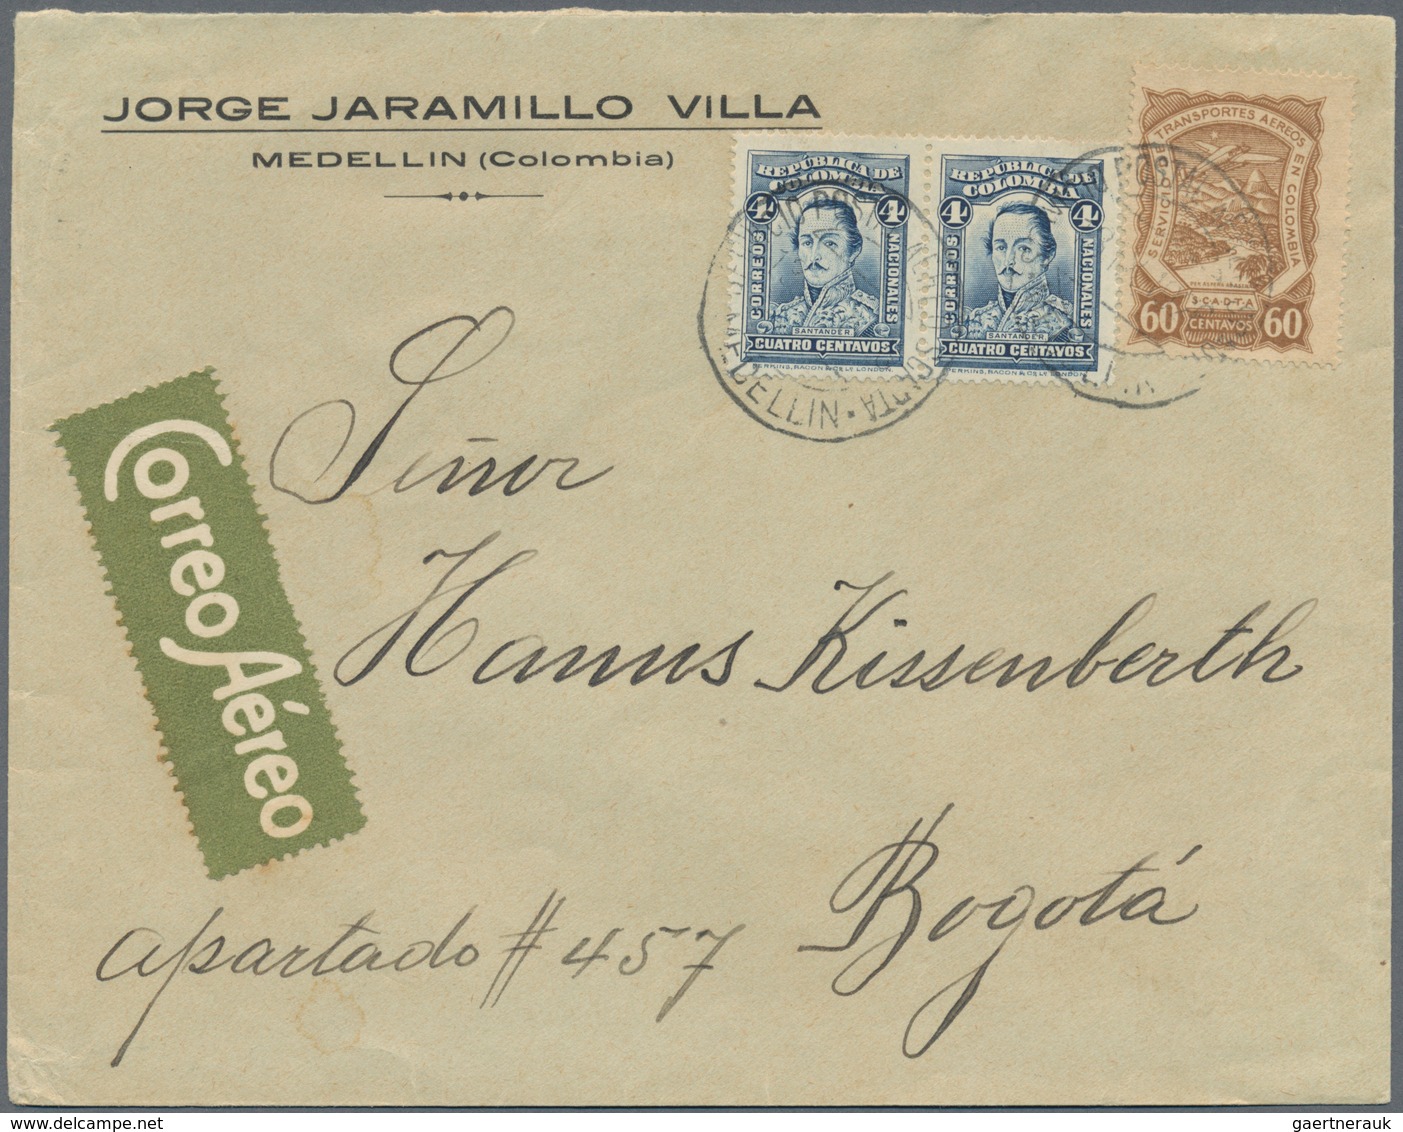 Kolumbien: 1905/62 (ca.), apprx. 80 covers plus two used stationery, mostly air mail to U.S. inc. ce